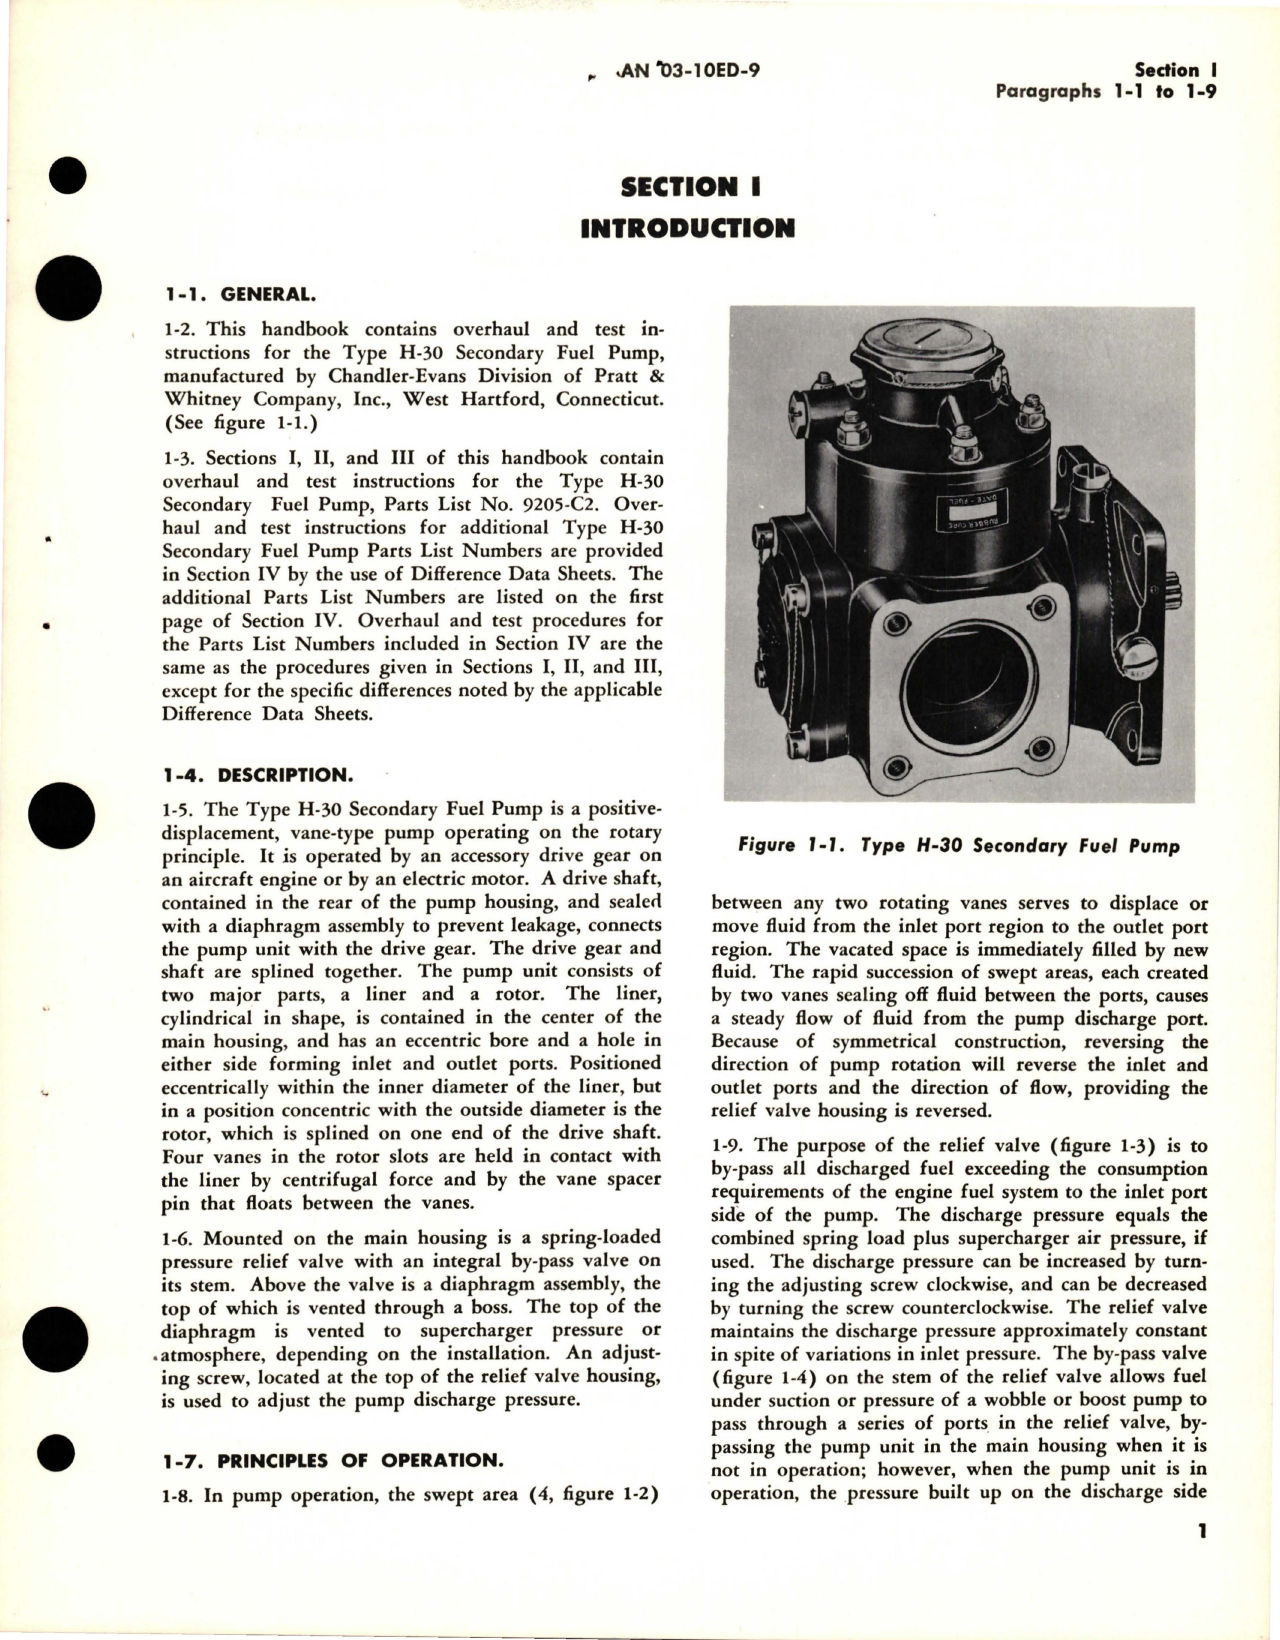 Sample page 5 from AirCorps Library document: Overhaul Instructions for Secondary Fuel Pump - Parts 9205-A1, 9205-B2 and 9205-C2